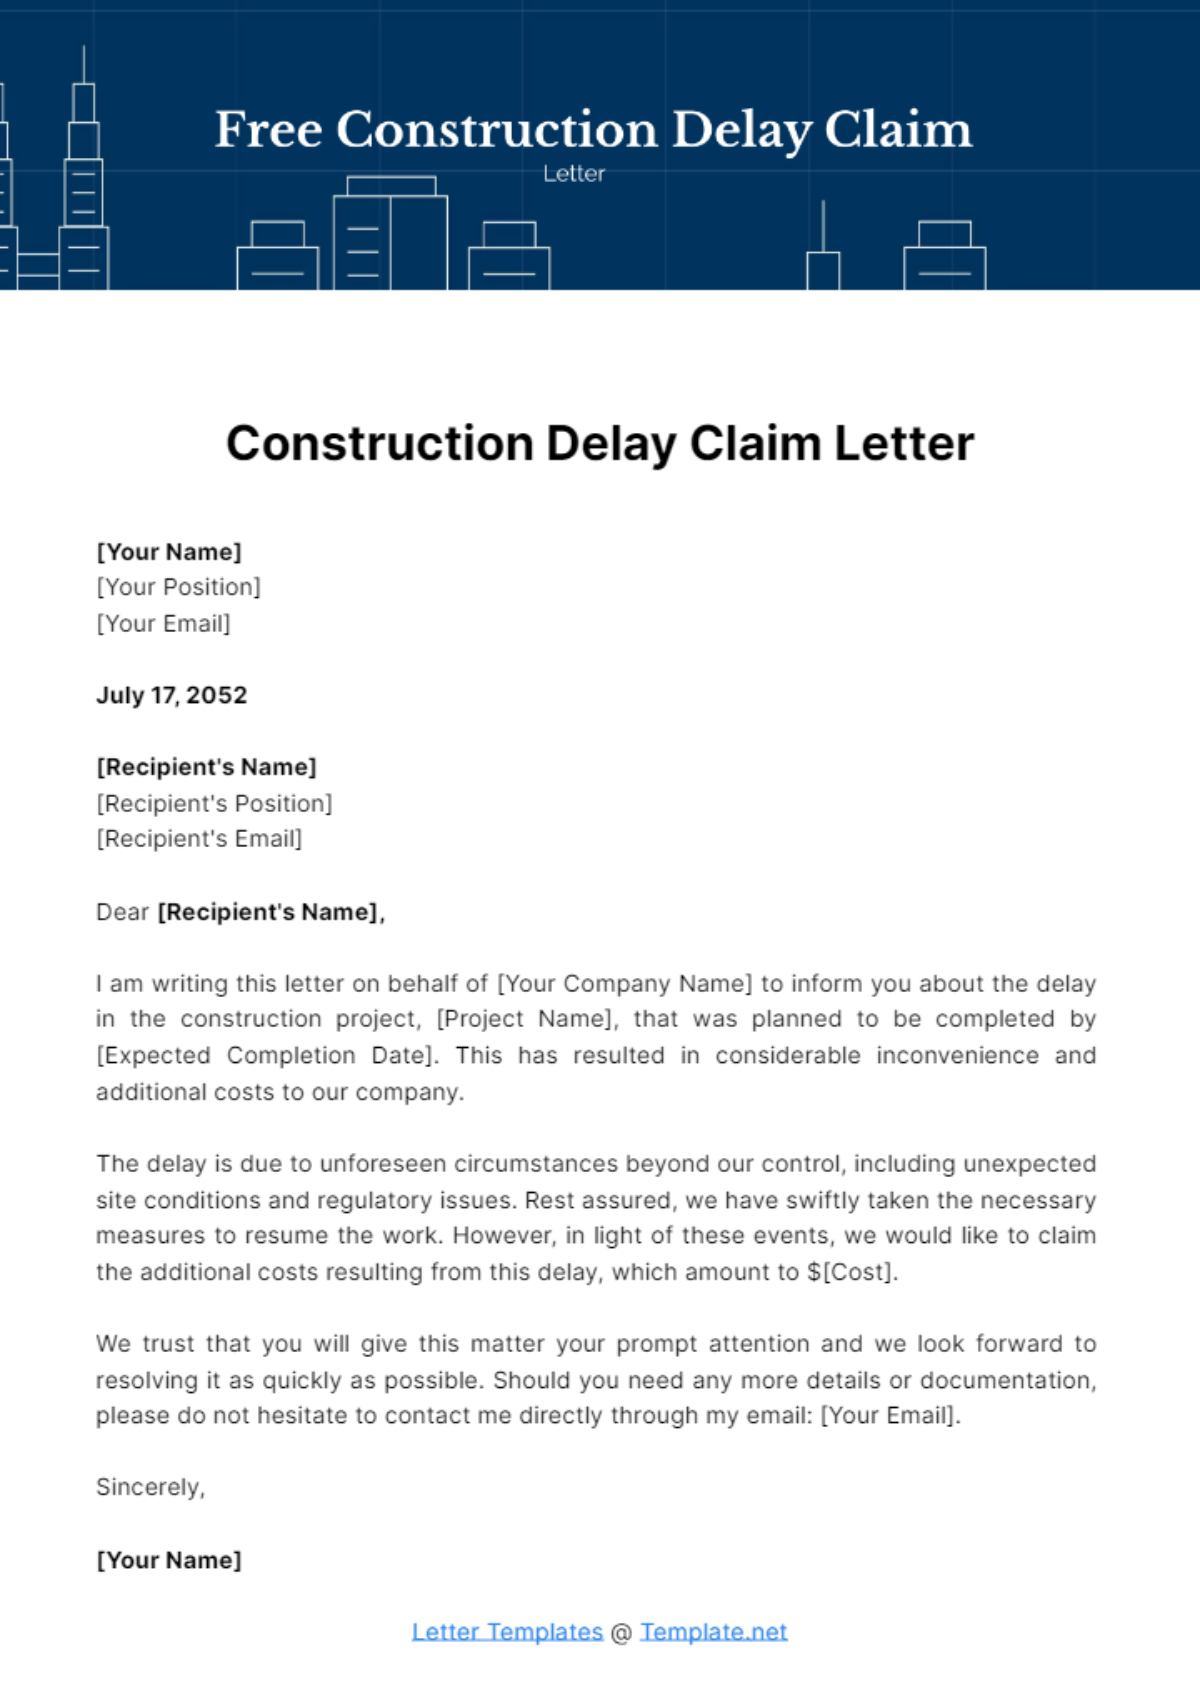 Free Construction Delay Claim Letter Template